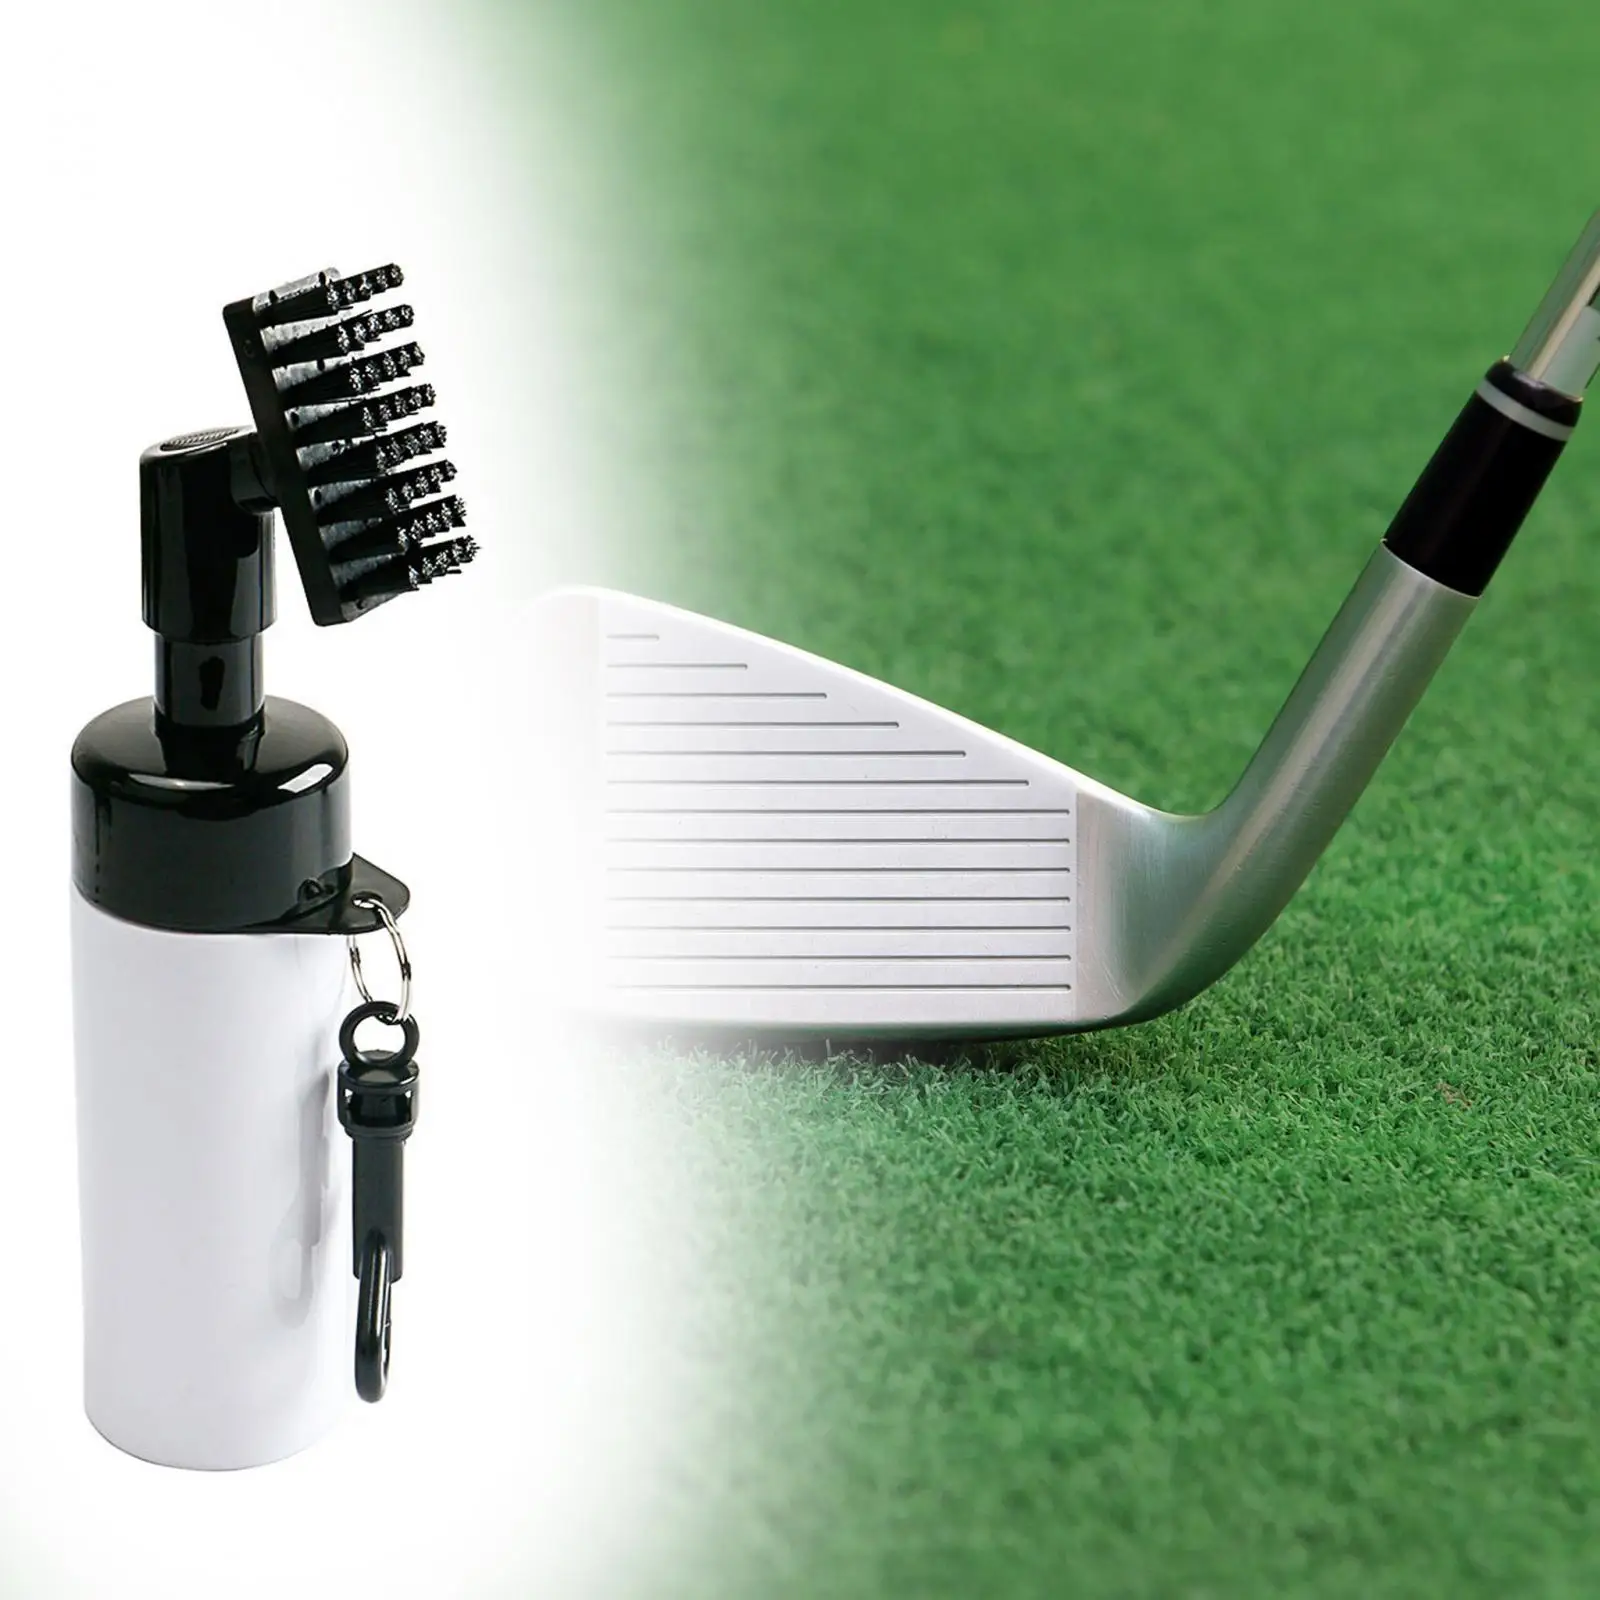 Golf Club Groove Cleaner Gift Golf Accessories Golf Club Cleaner Brush with